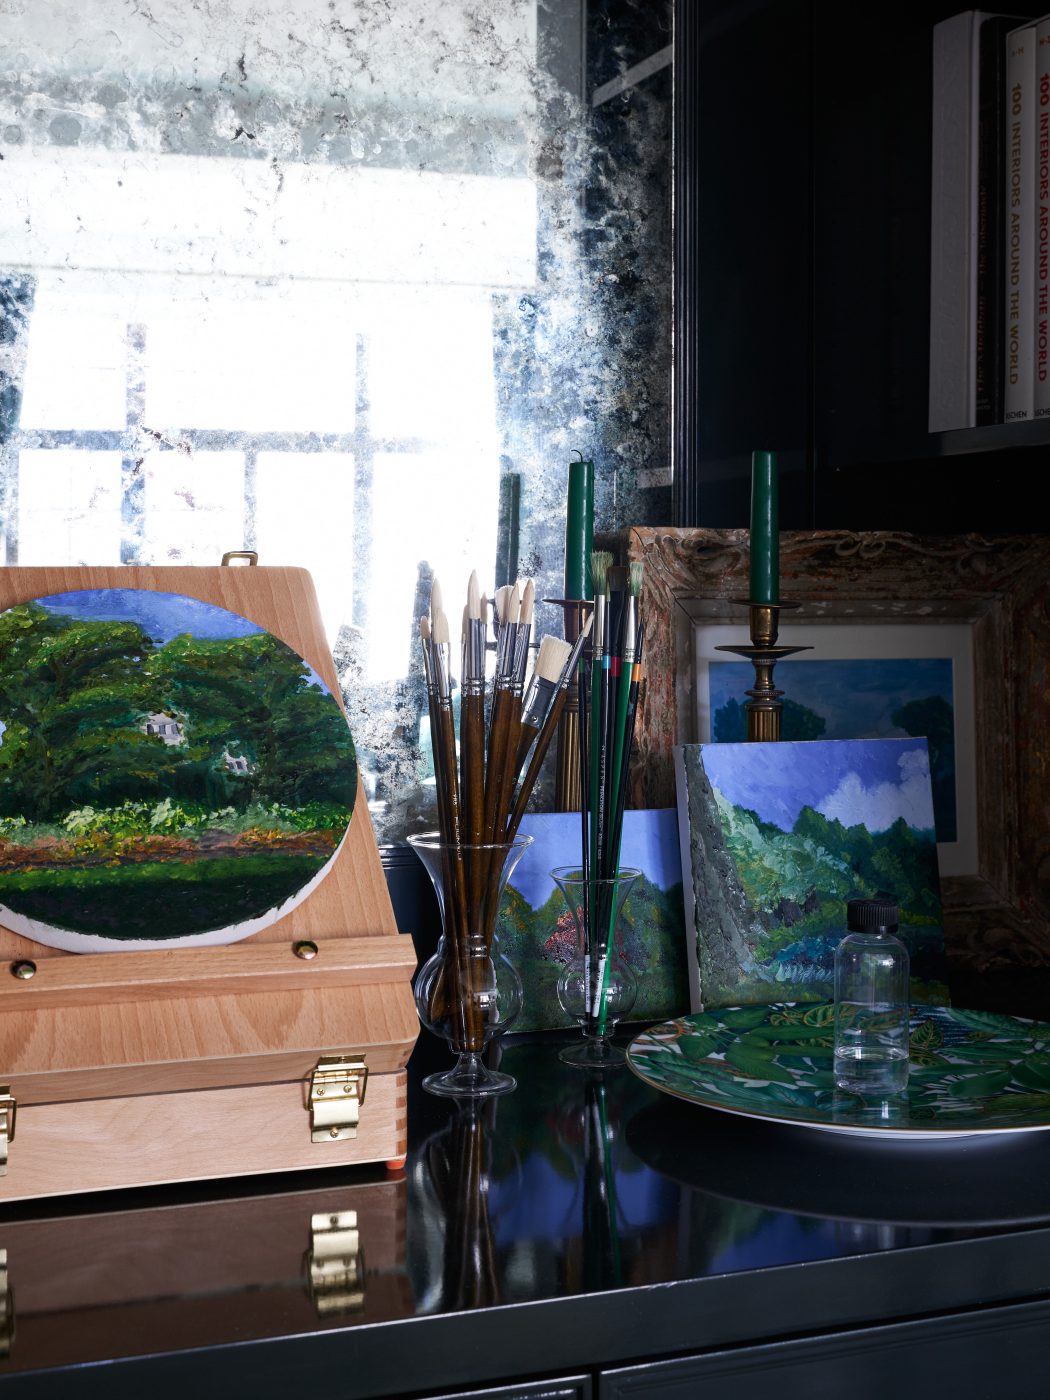 view of Bennett Leifer's paintings and paintbrushes in a bar area in his home that he now uses as a studio